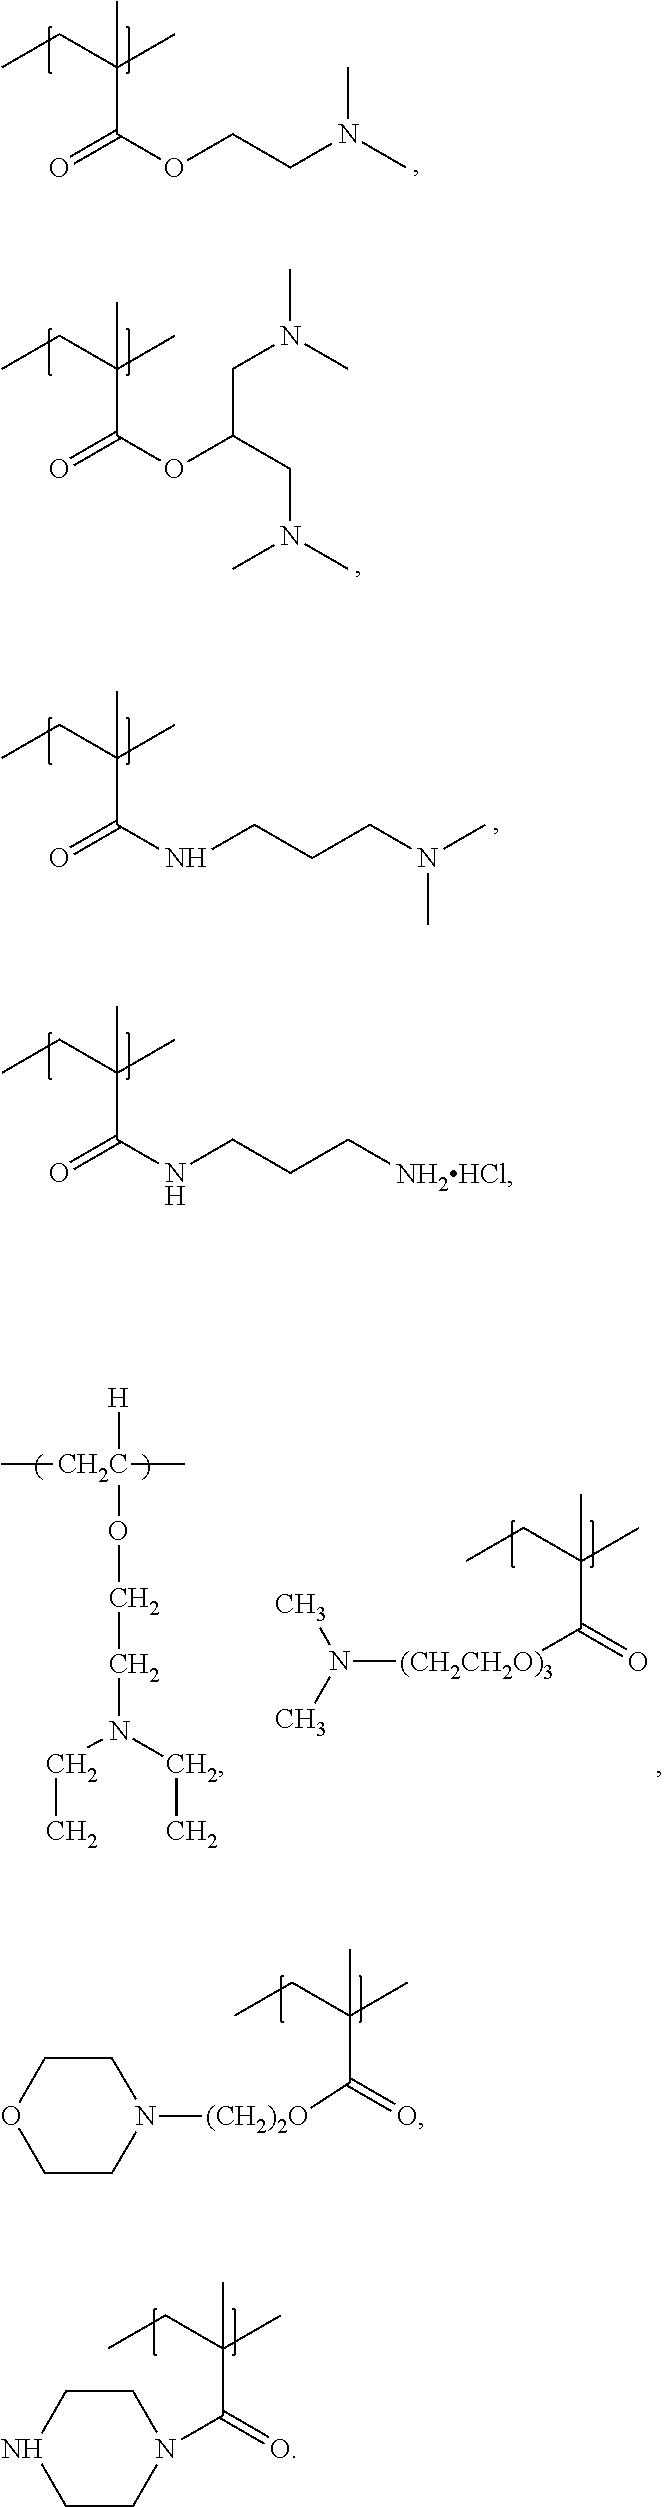 Polymers, compositions and methods for use for foams, laundry detergents, shower rinses and coagulants